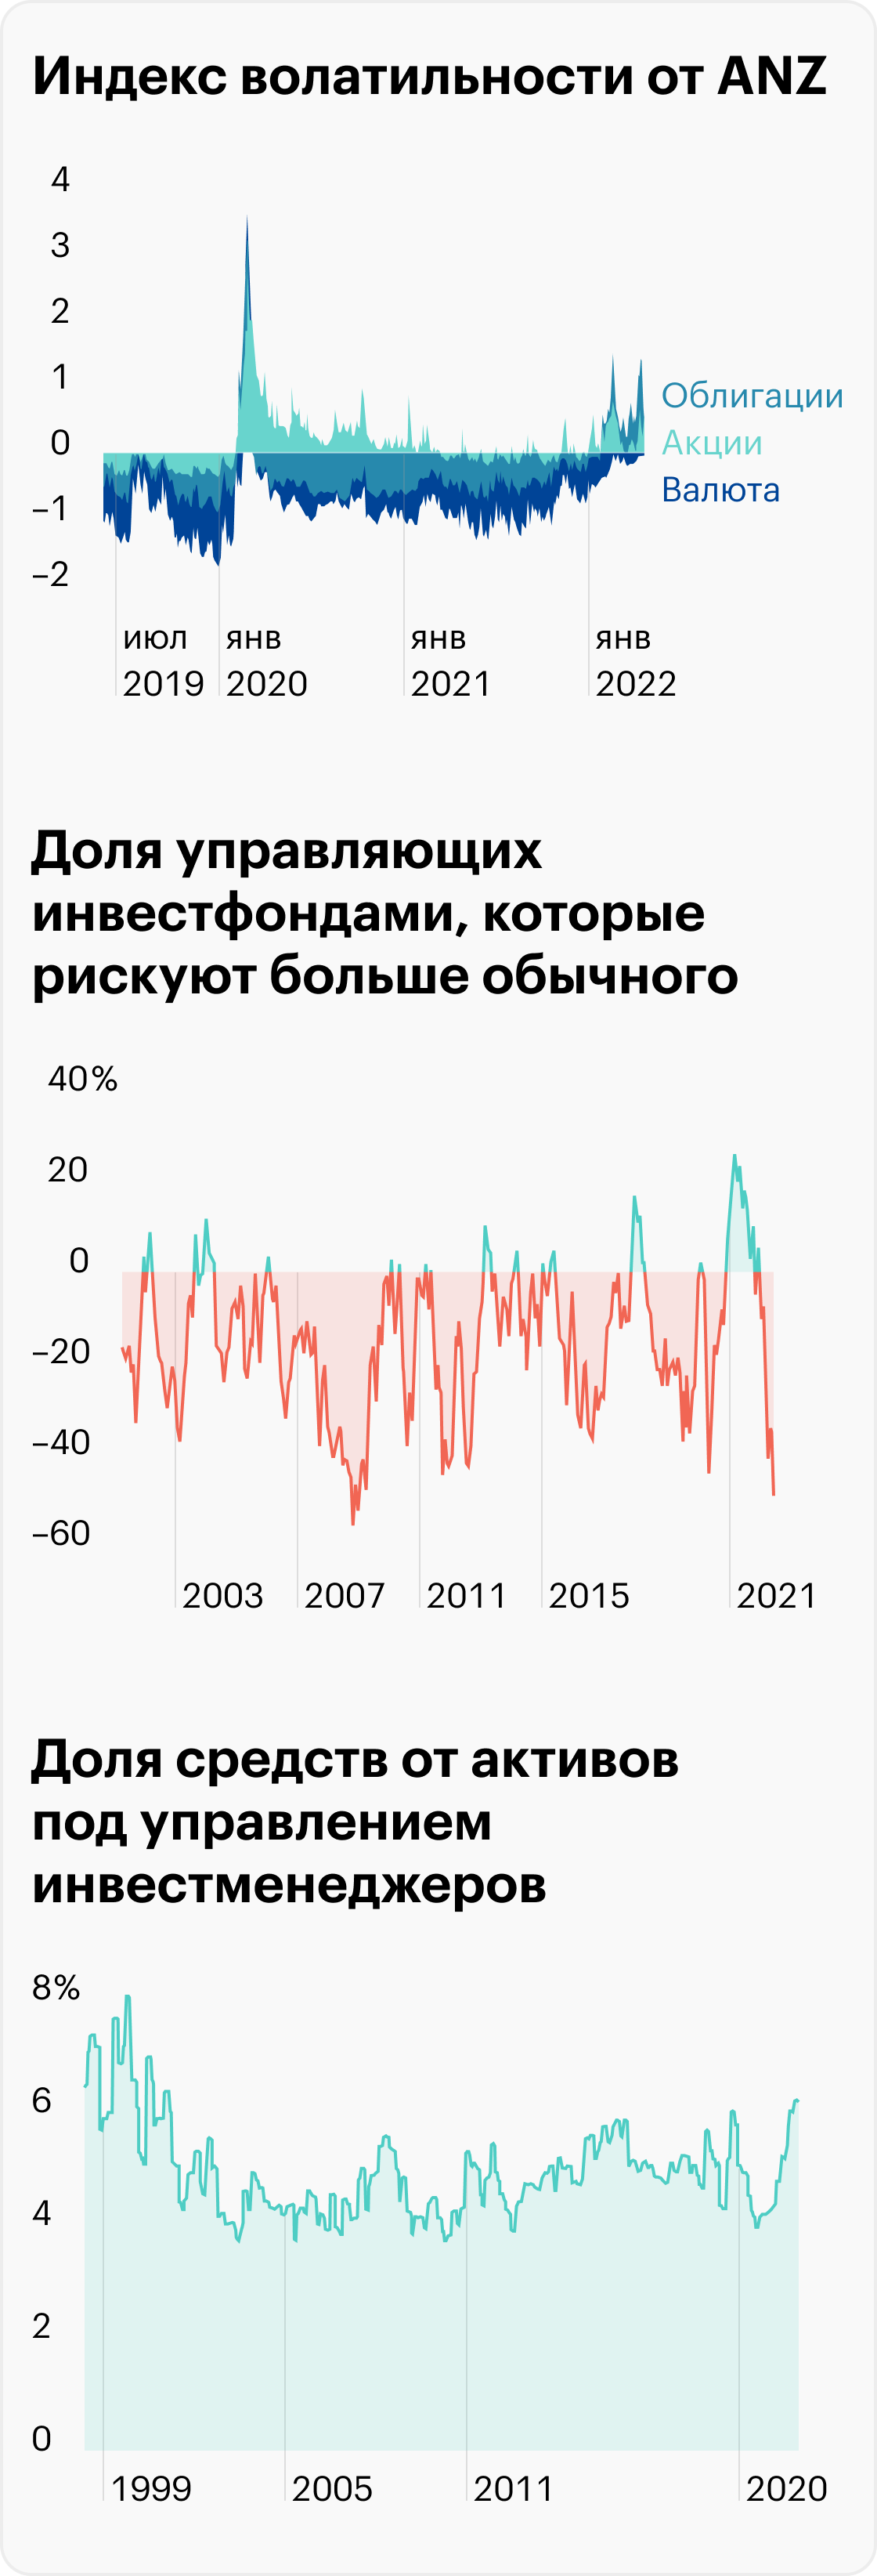 Источник: Daily Shot, Volatility remains elevated, Risk Appetite, Cash levels